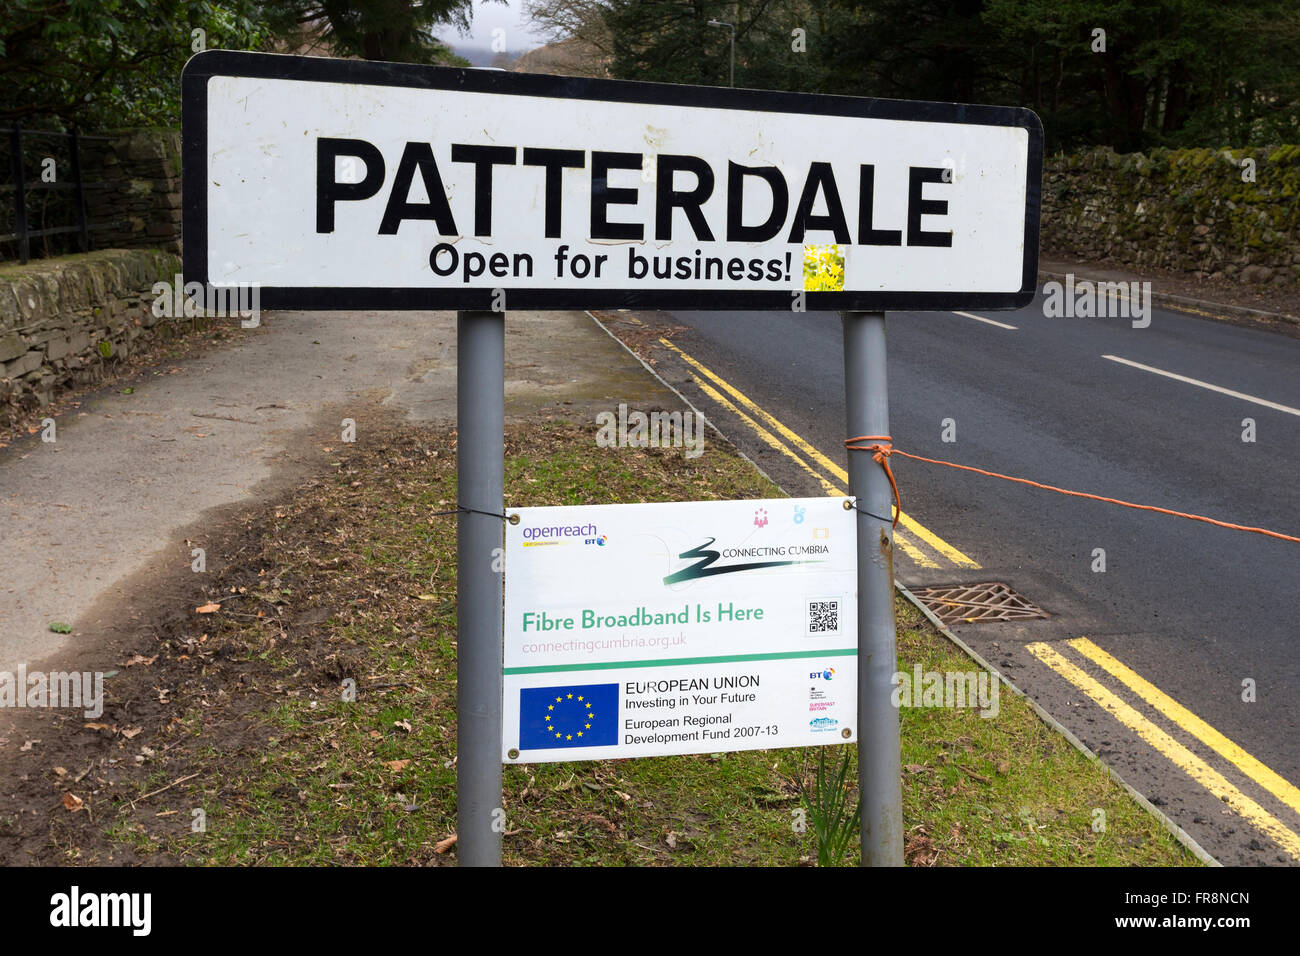 Weather Beaten Patterdale Open for Business Sign with BT Fibre Broadband Sign Underneath Highlighting European Union Investment, Stock Photo